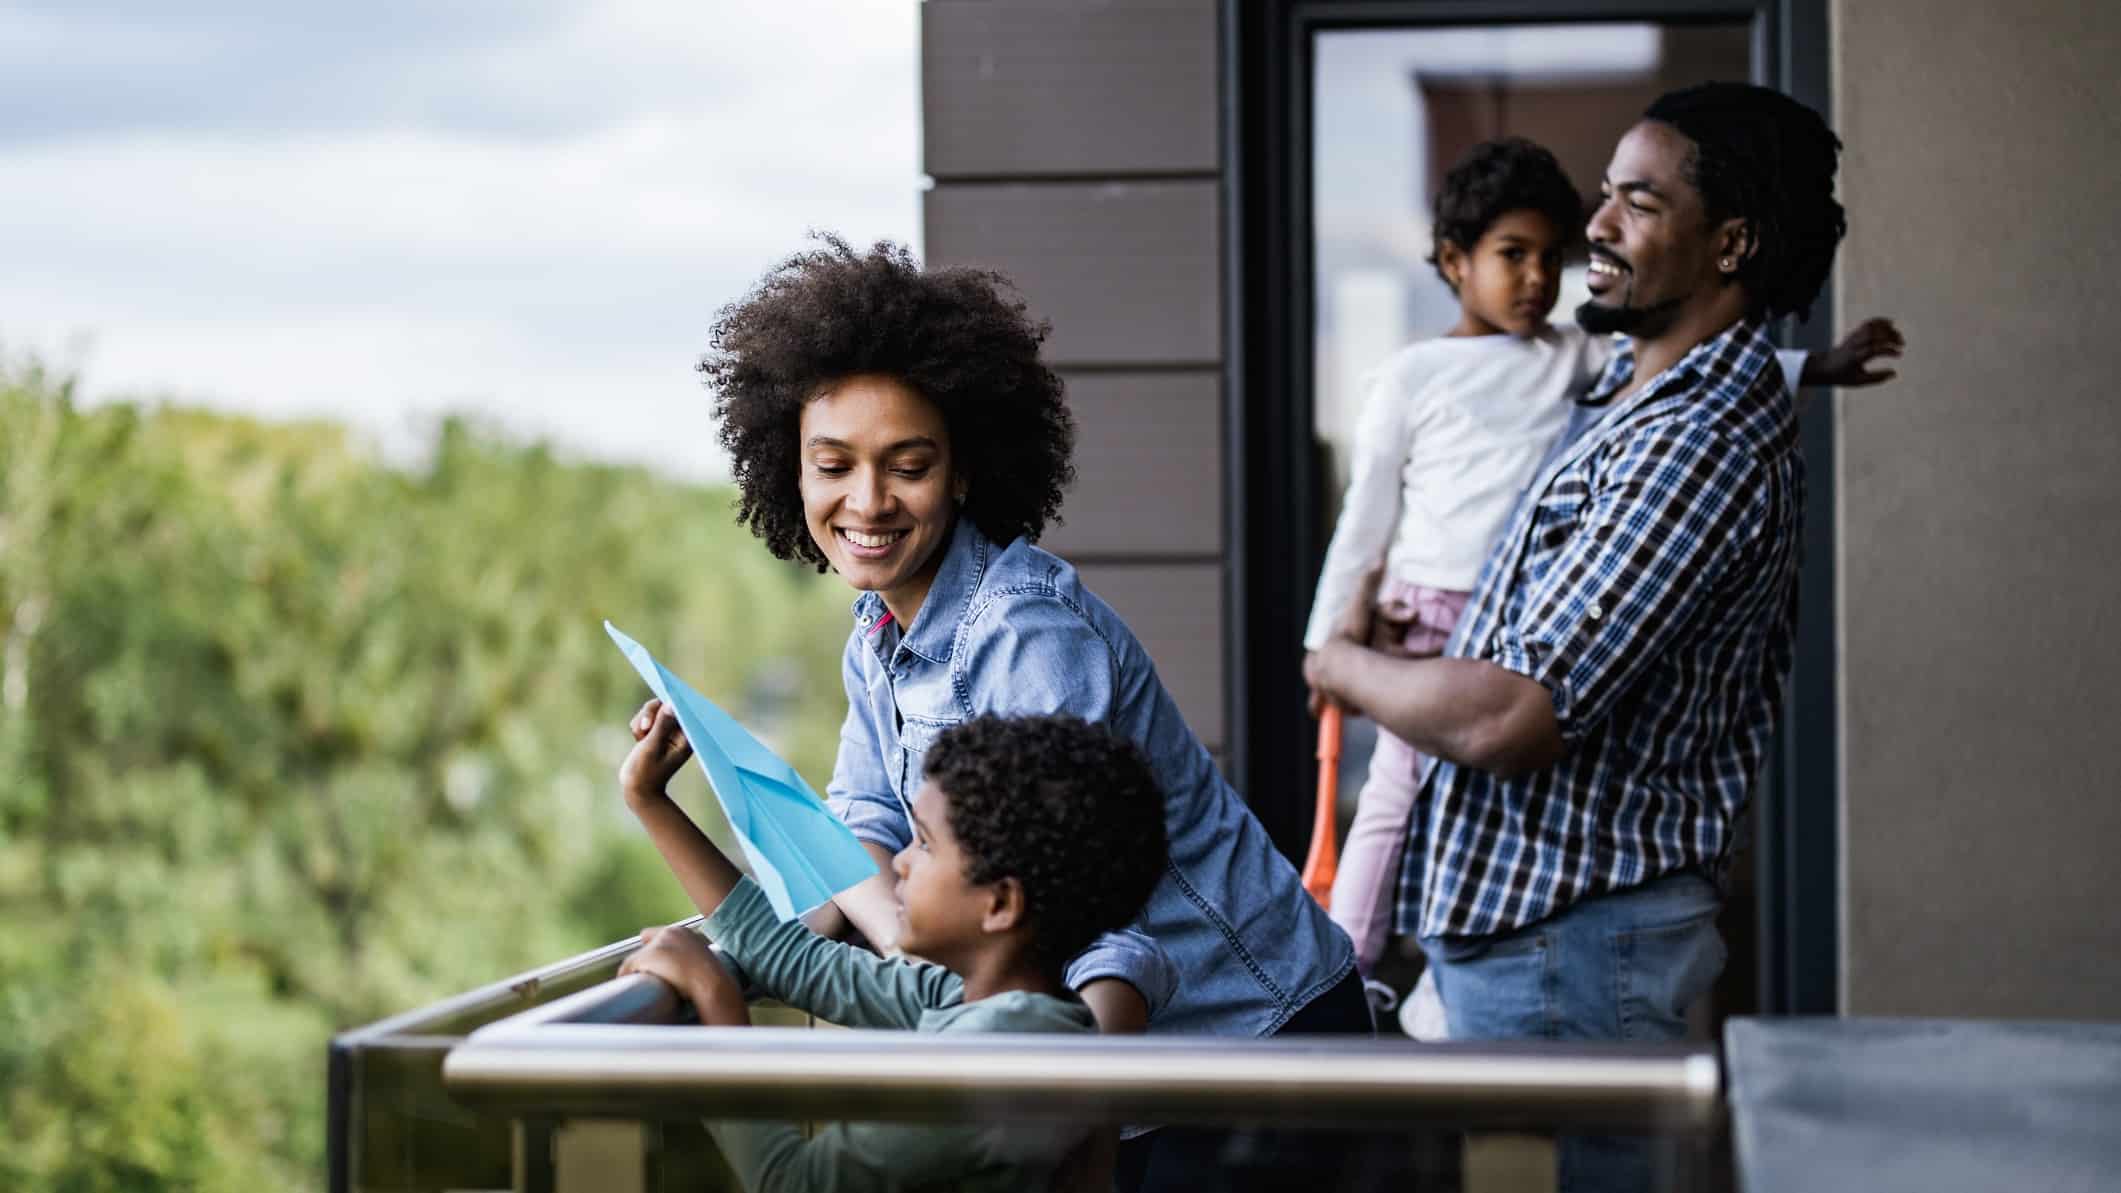 A young family with two kids smiling as they stand on the balcony of an apartment they are inspecting after seeing it advertised on REA